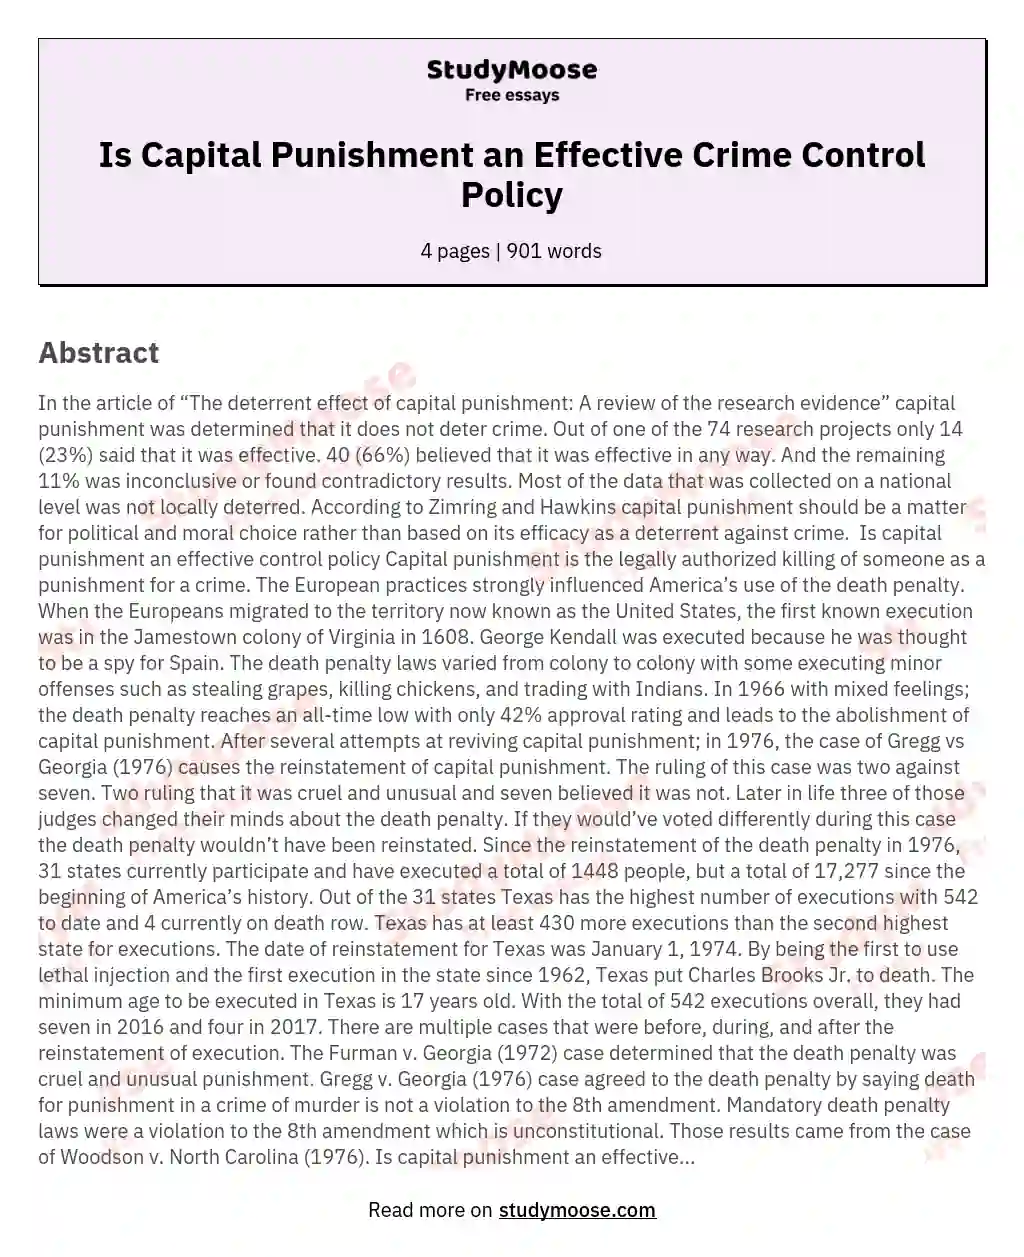 Is Capital Punishment an Effective Crime Control Policy essay